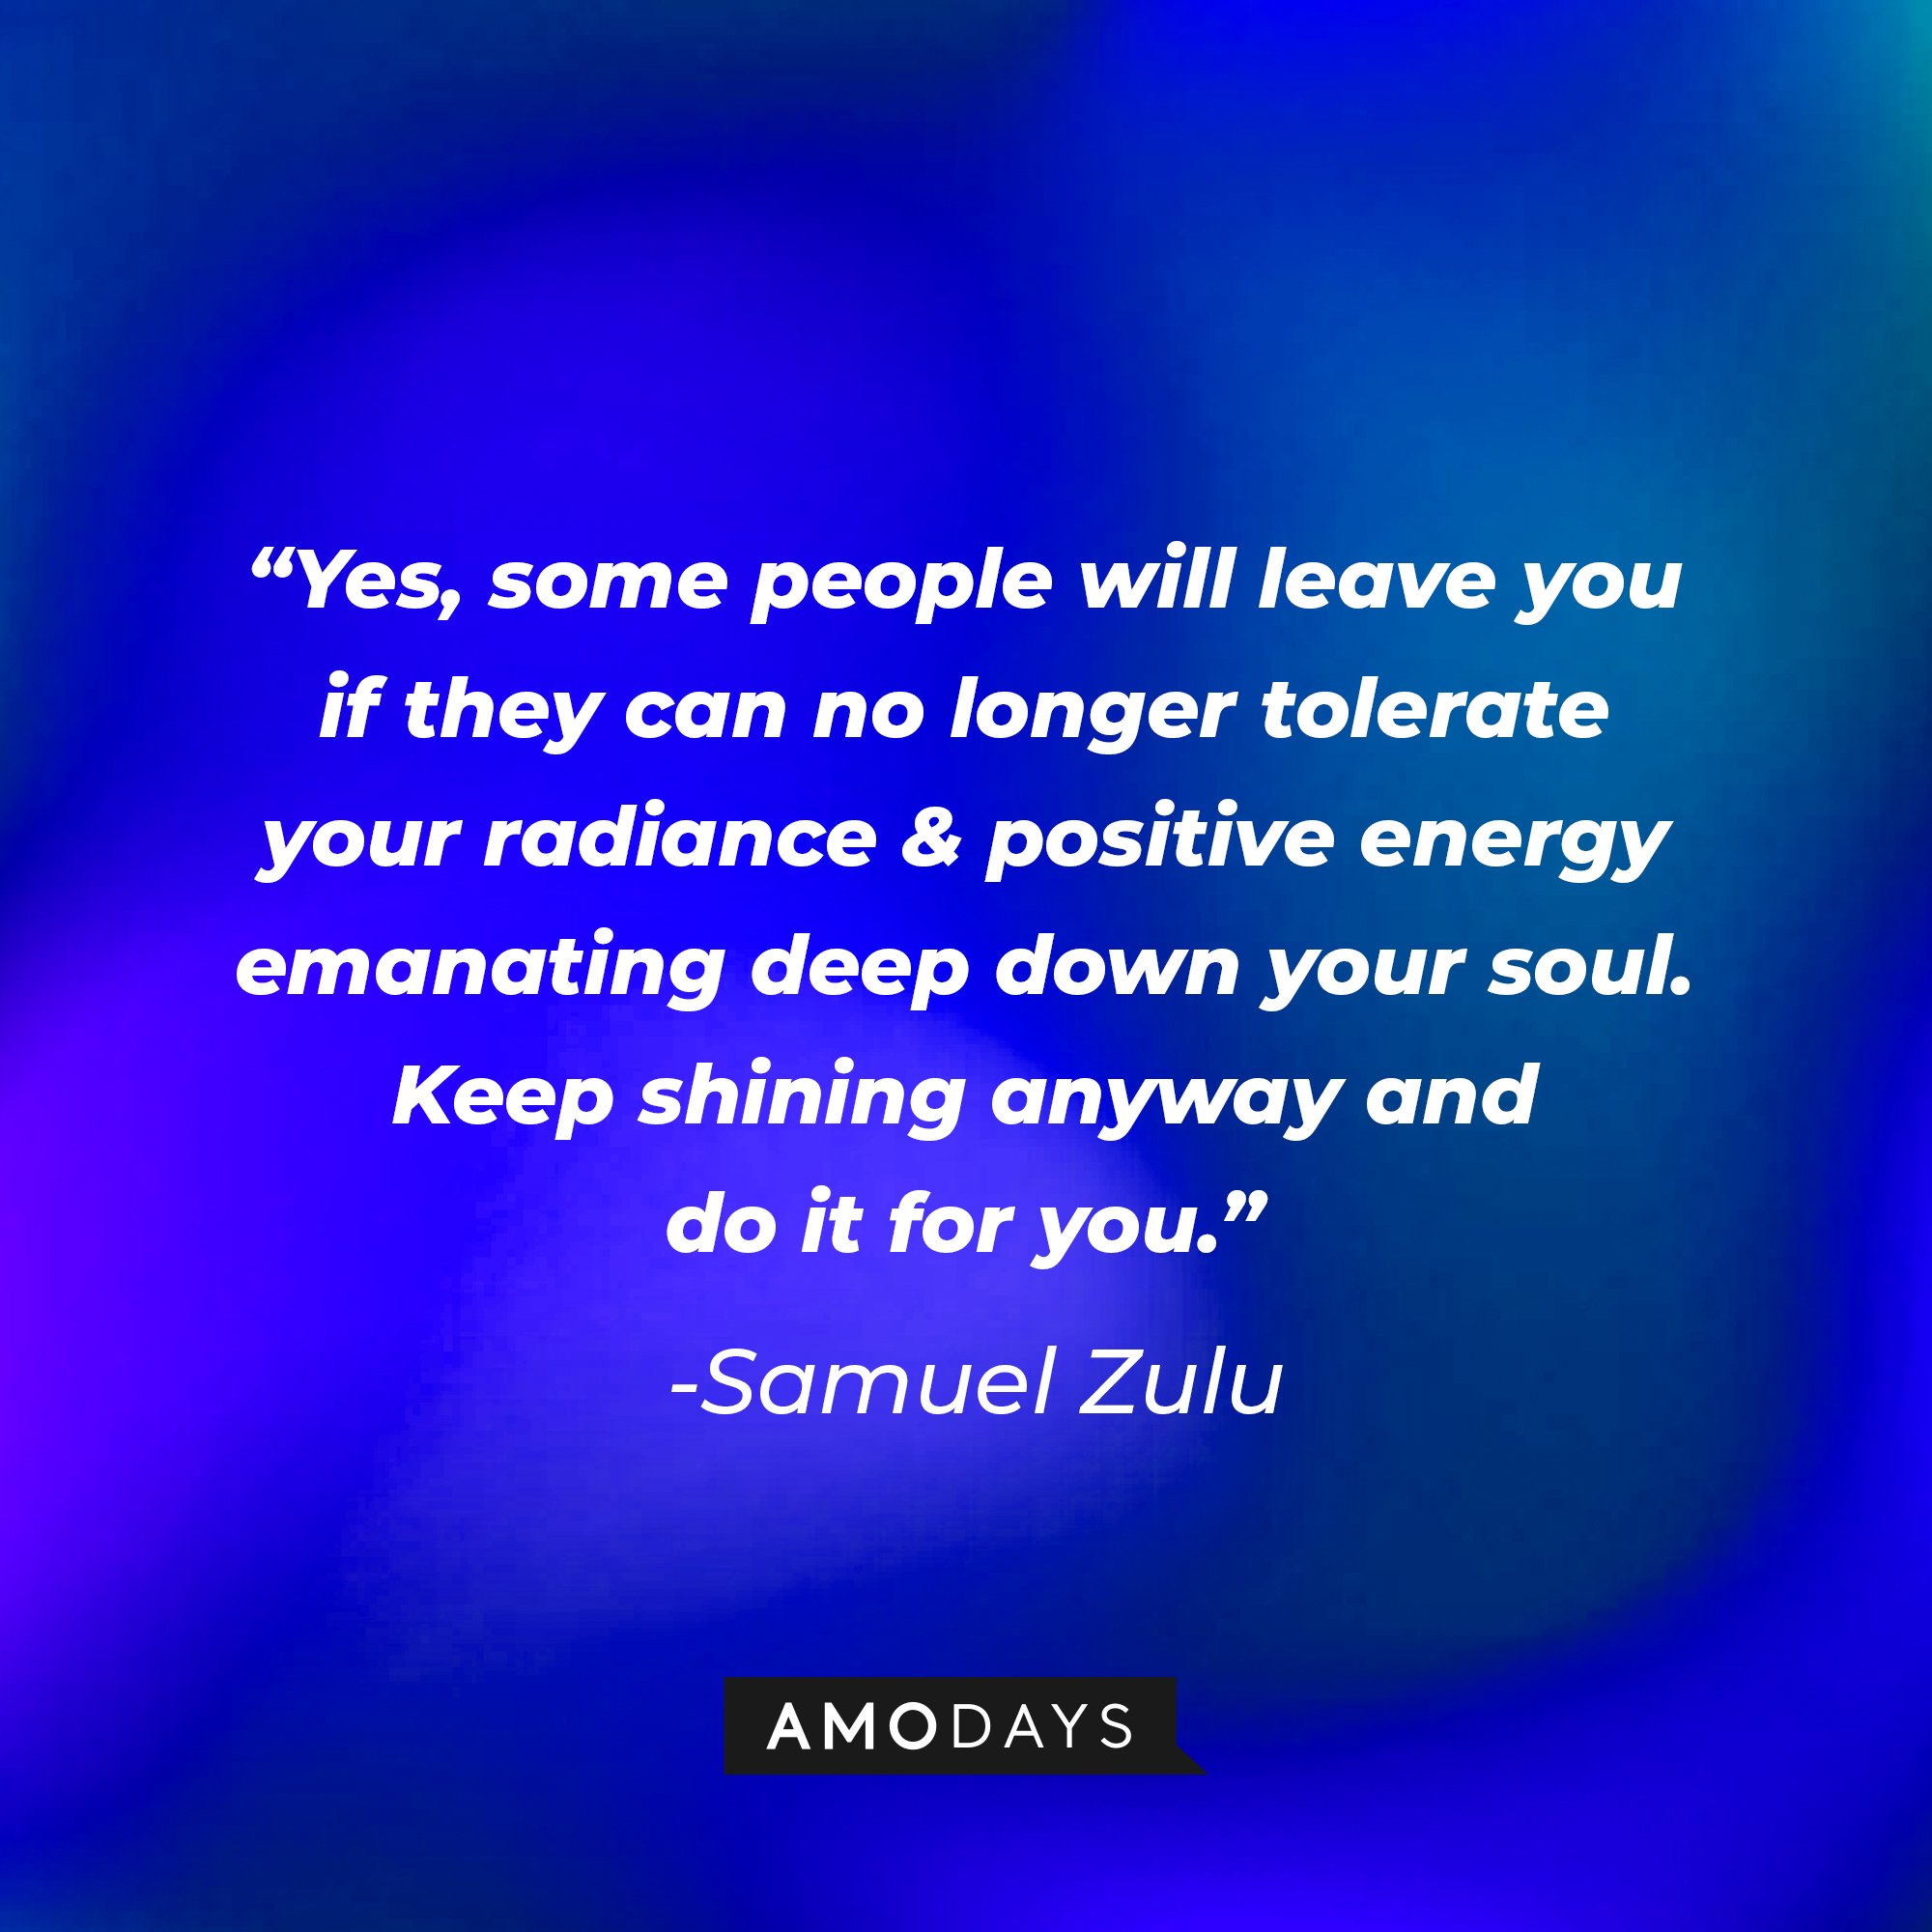  Samuel Zulu’s quote: "Yes, some people will leave you if they can no longer tolerate your radiance & positive energy emanating deep down your soul. Keep shining anyway and do it for you."  | Image: AmoDays